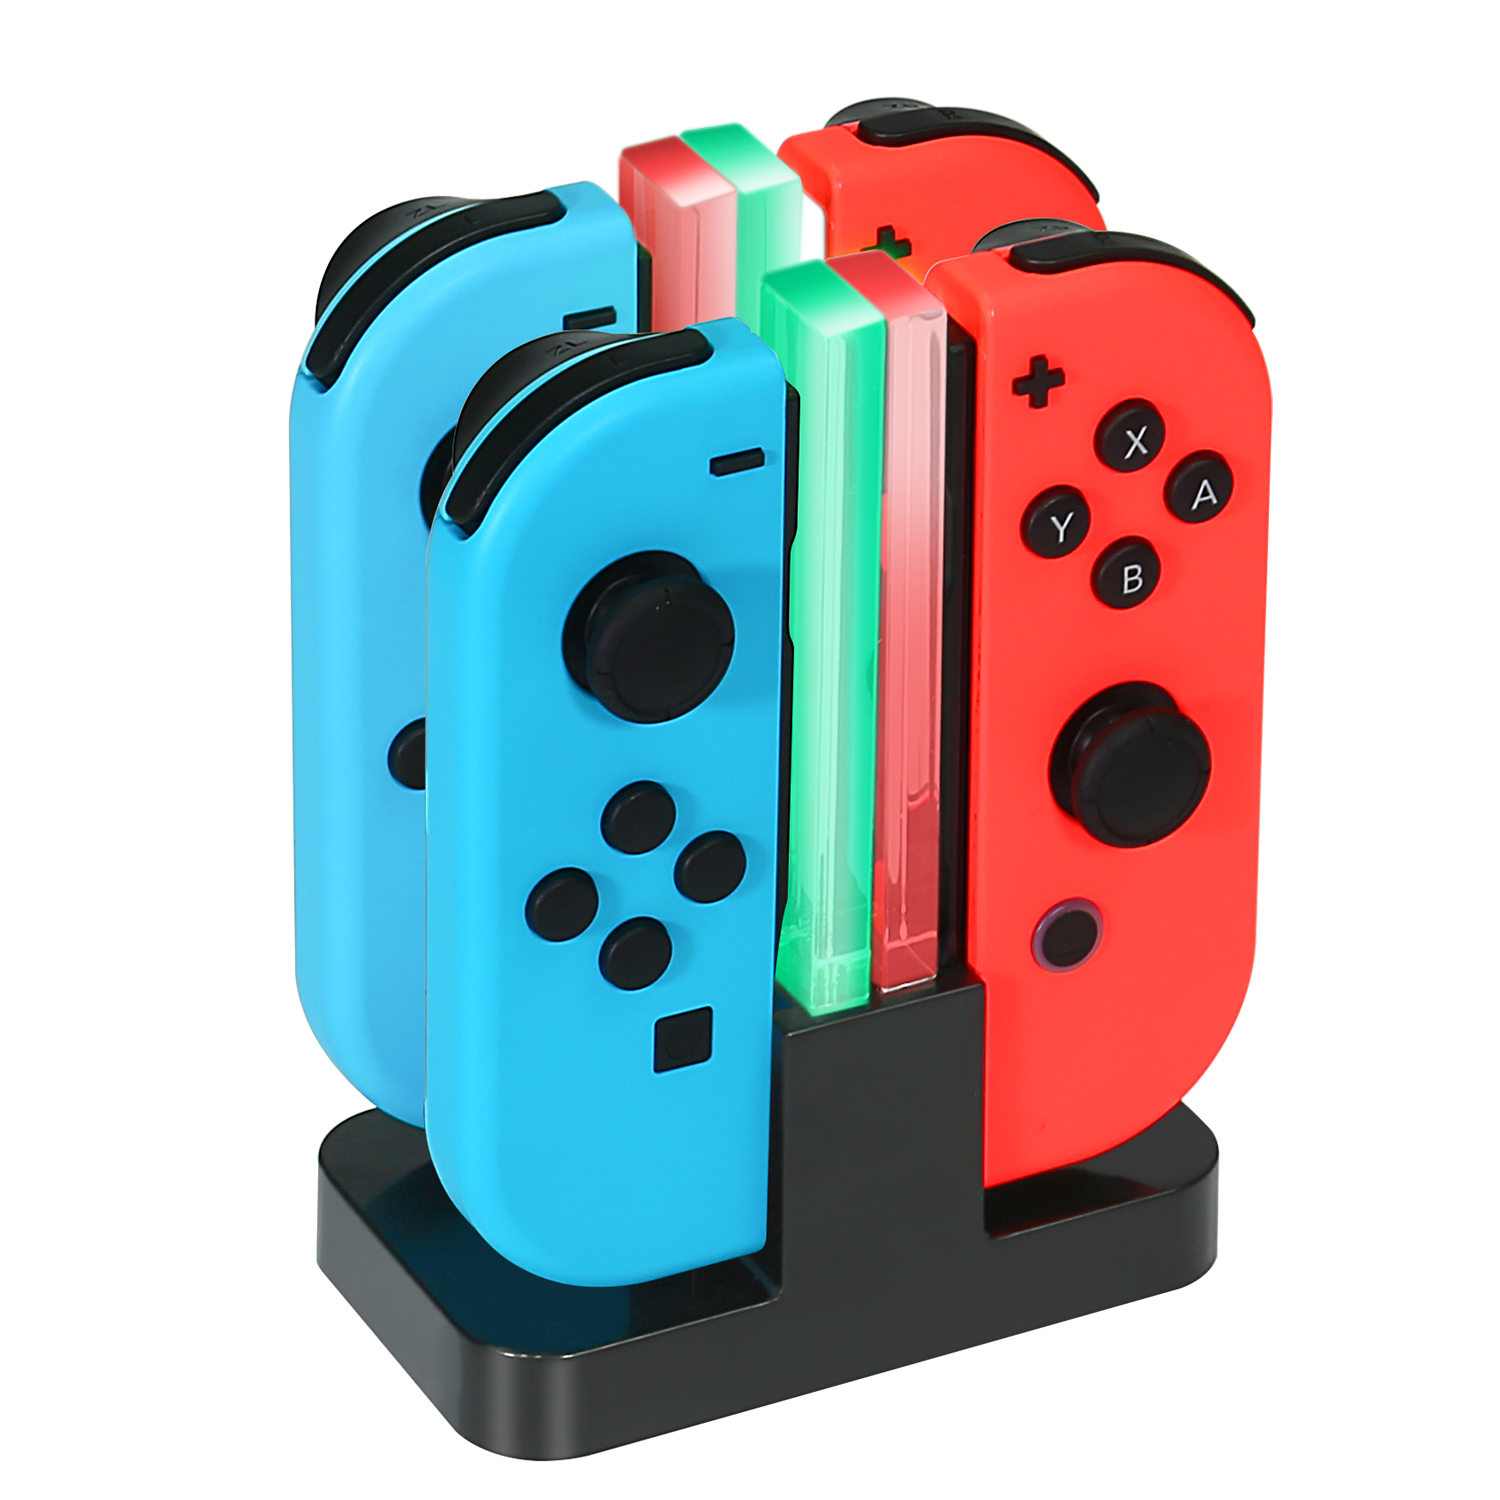 KINGTOP Charging Dock For Nintendo Switch Joy-Con Controllers